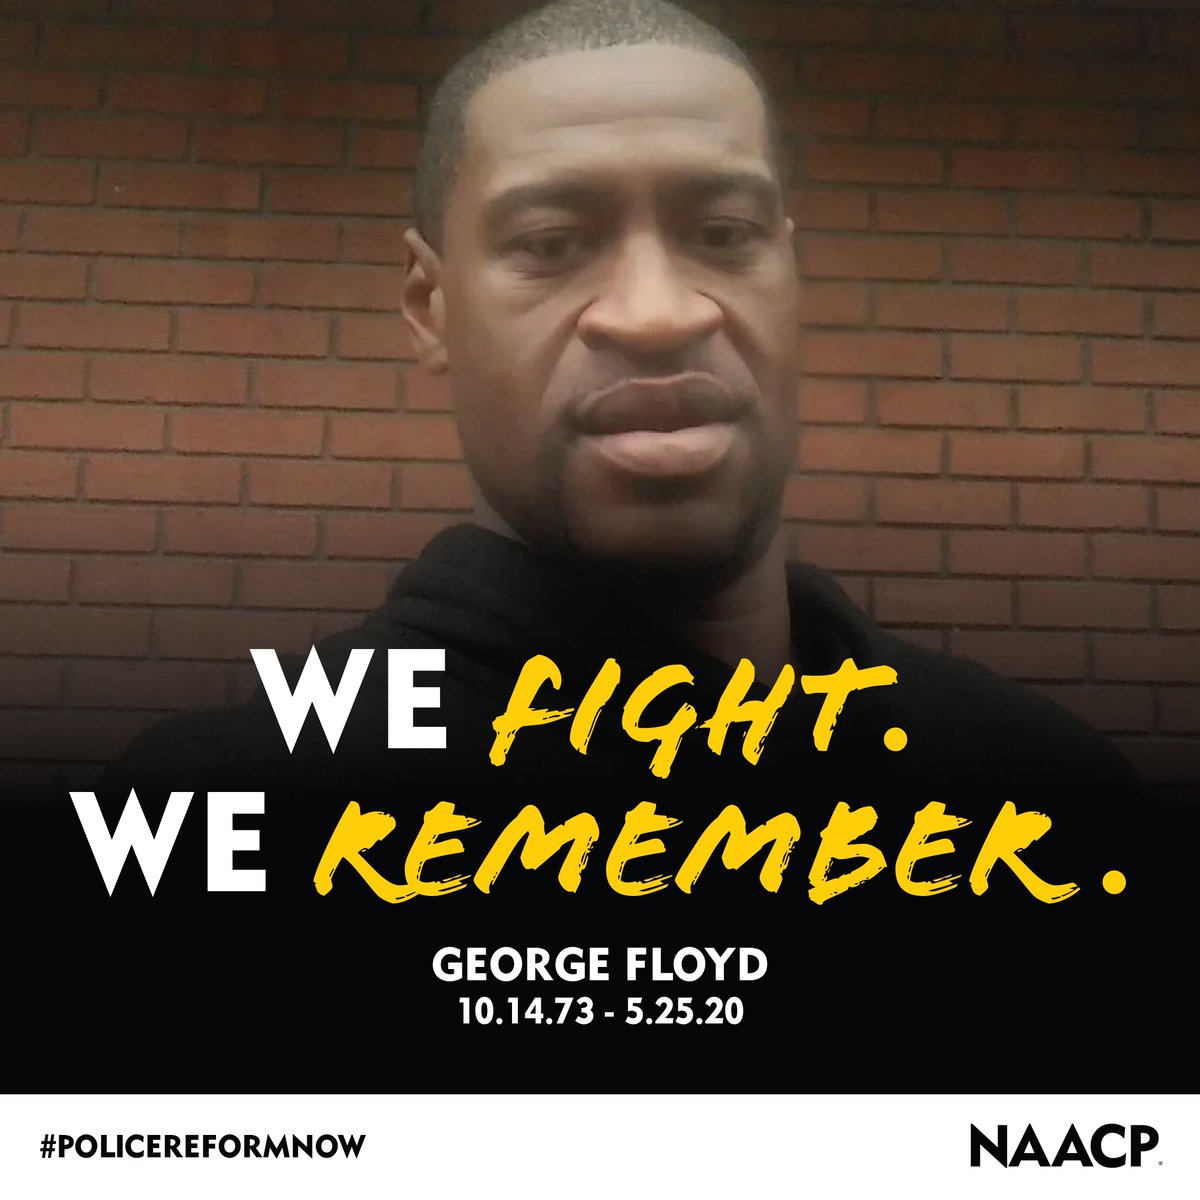 Four years after the tragic murder of #GeorgeFloyd, his legacy endures as a reminder of the work that remains to combat racial discrimination and police violence. Today calls on us to renew our commitment to the fight for #PoliceReform. #PoliceReformNow